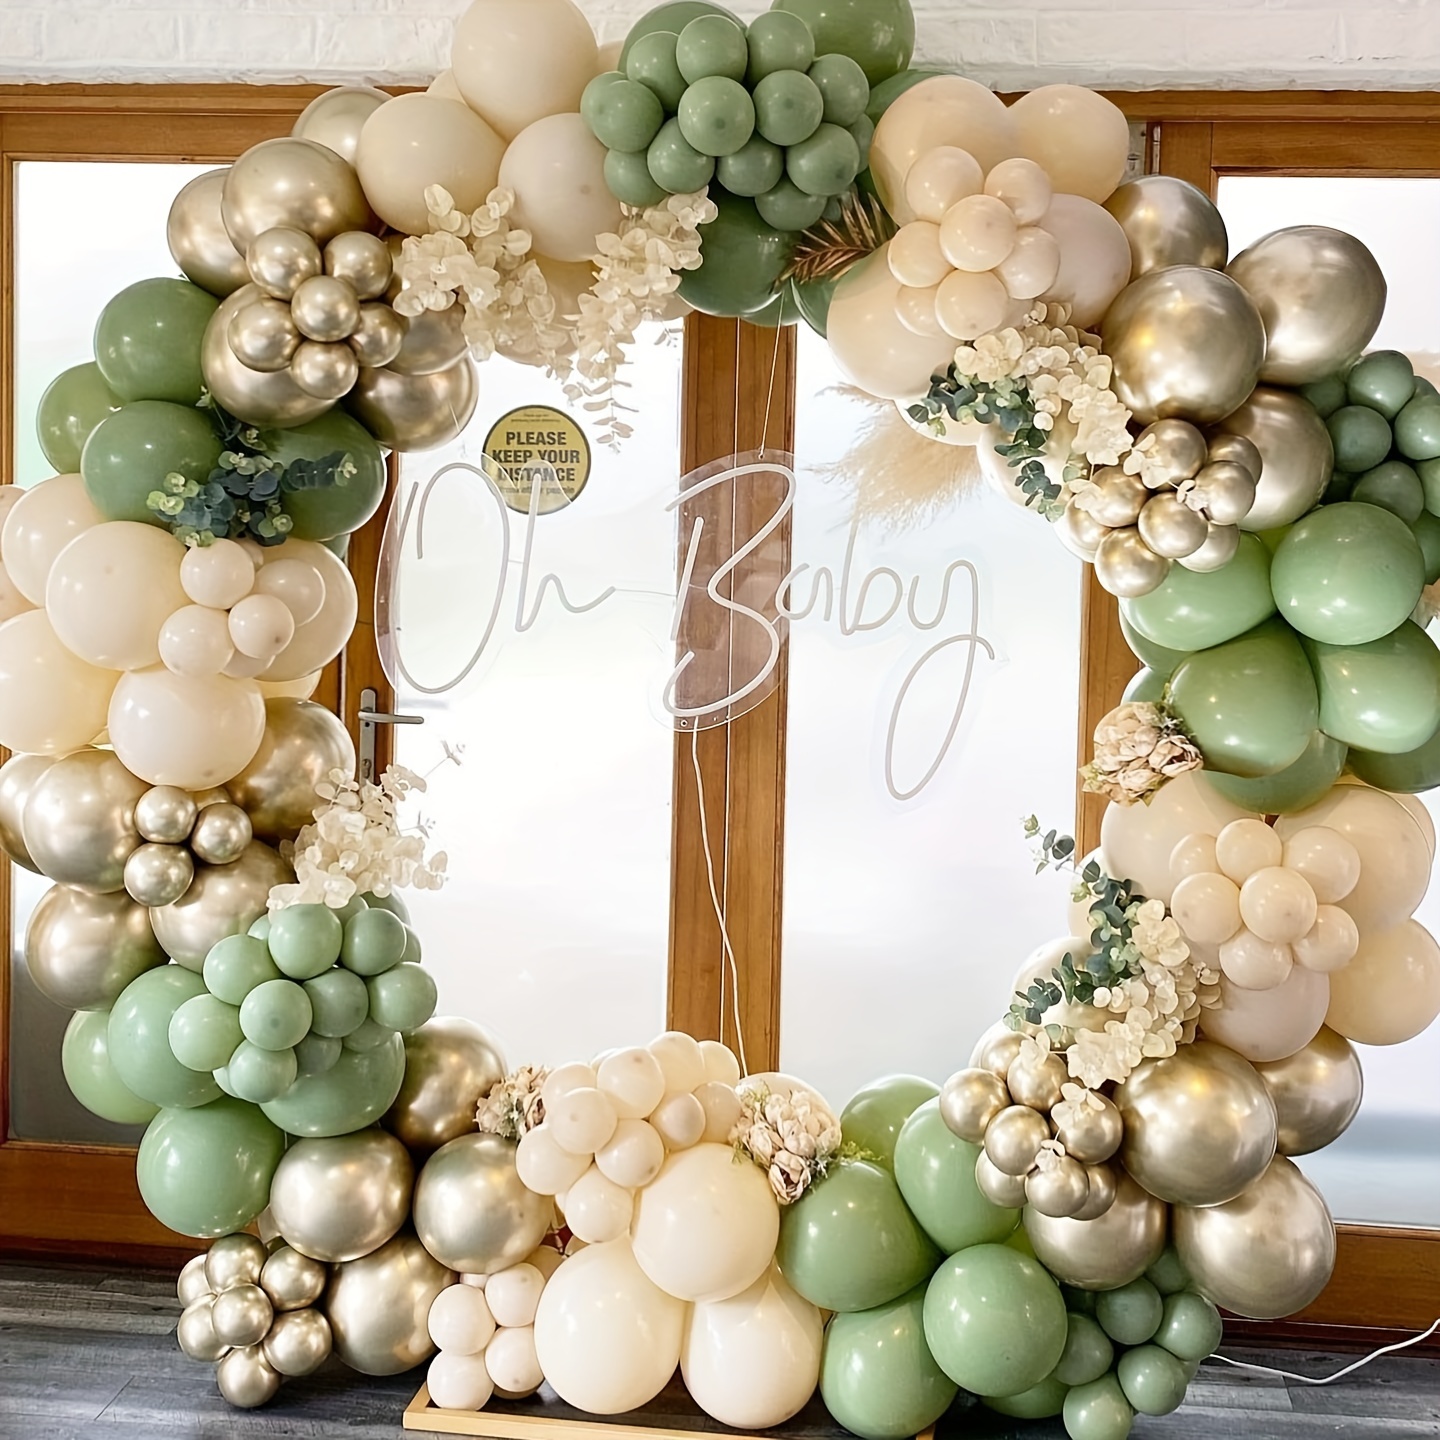 

Set, Grey Green Balloon Wreath Arch Set 147 Pieces - White Sand Chrome Plated Metal Golden Balloon Suitable For Baby Showers, Jungle Hunting Parties, Weddings, Birthday Party Decorations